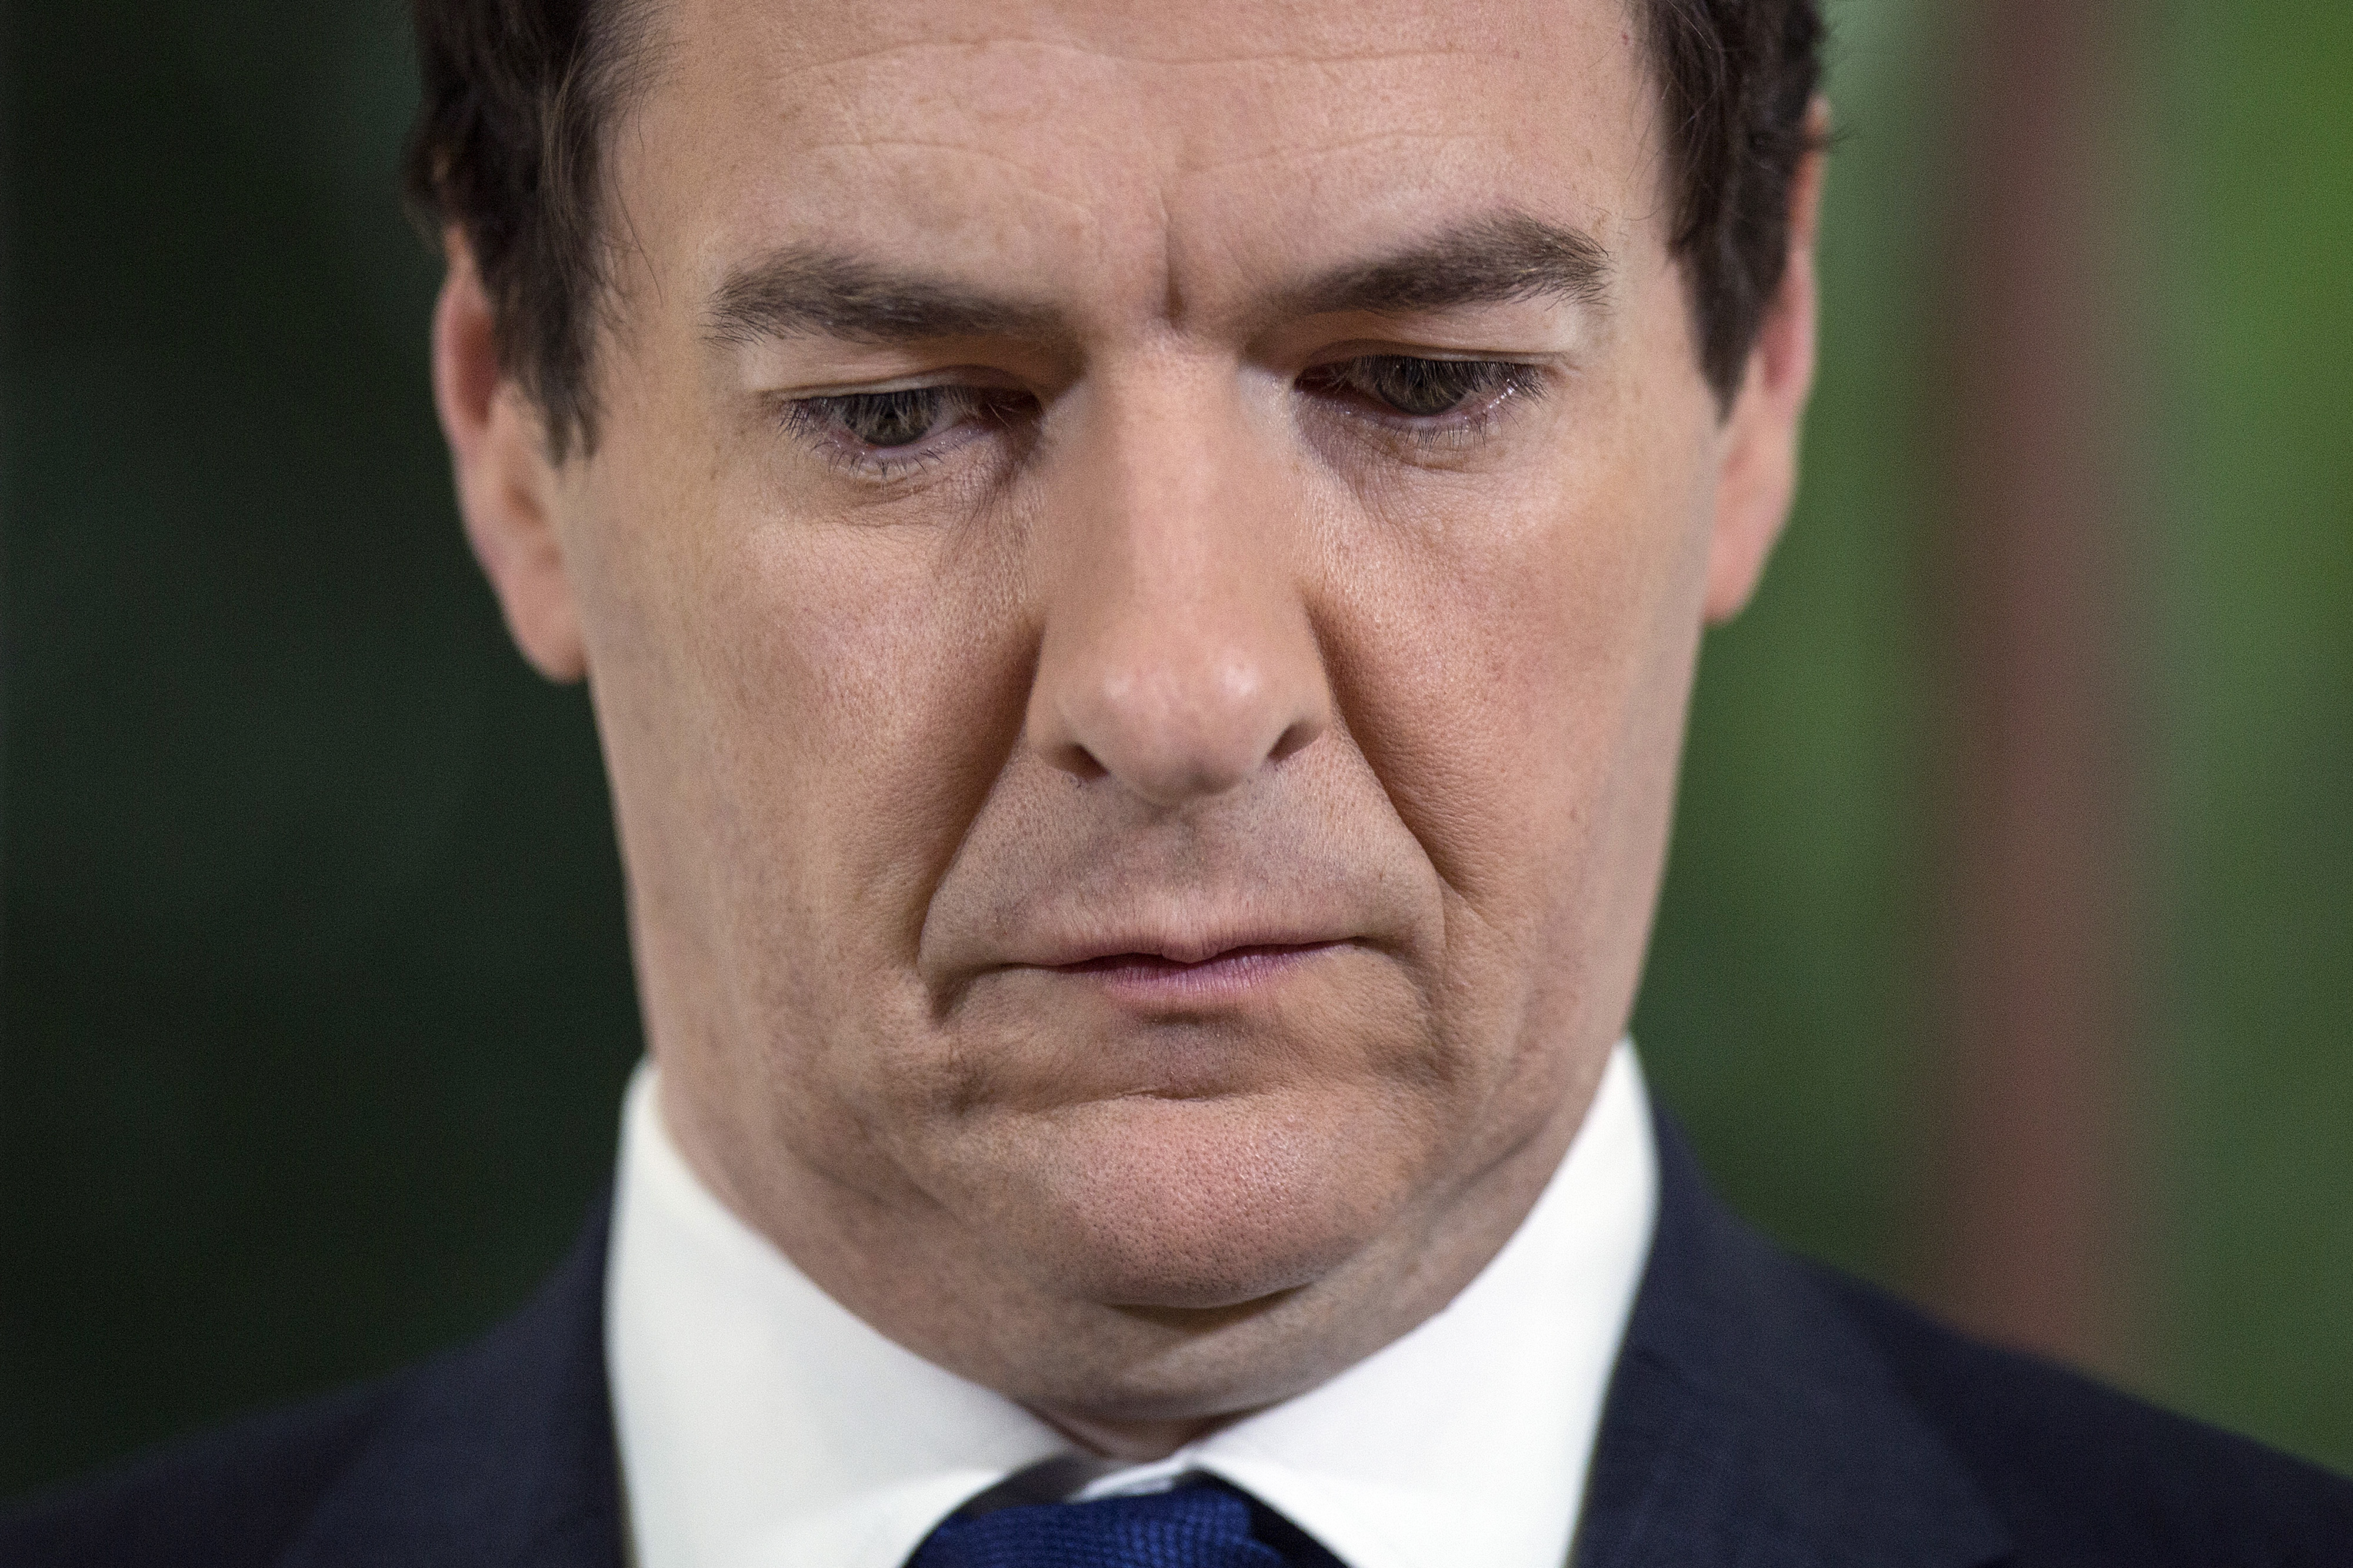 U.K. Chancellor Of The Exchequer Osborne News Conference As Pound Slump Deepens Amid Brexit Turmoil